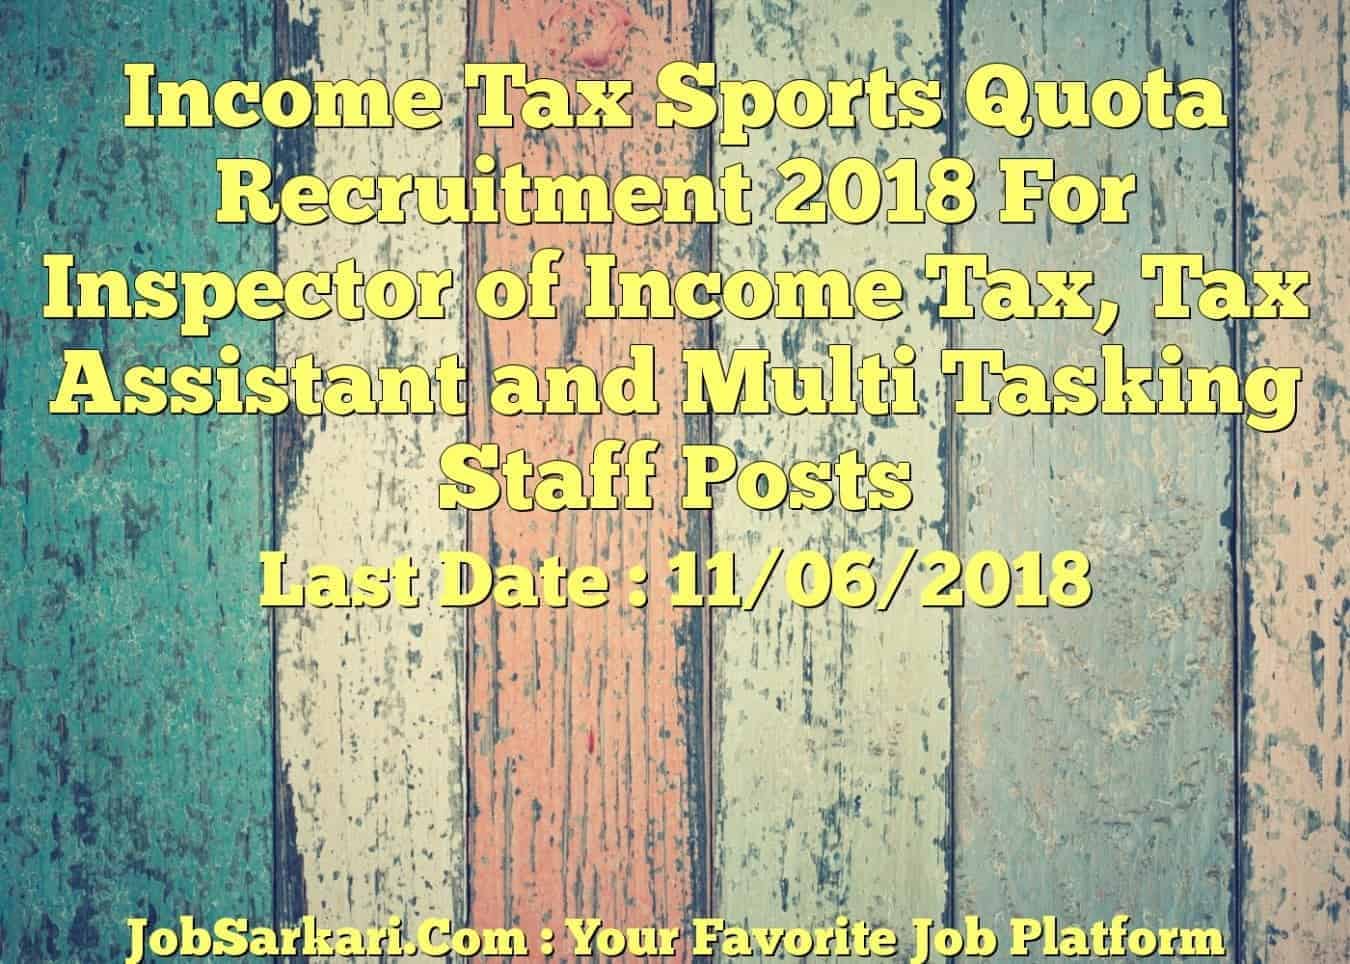 Income Tax Sports Quota Recruitment 2018 For Income Tax Inspector, Tax Assistant and Multi Tasking Staff Posts